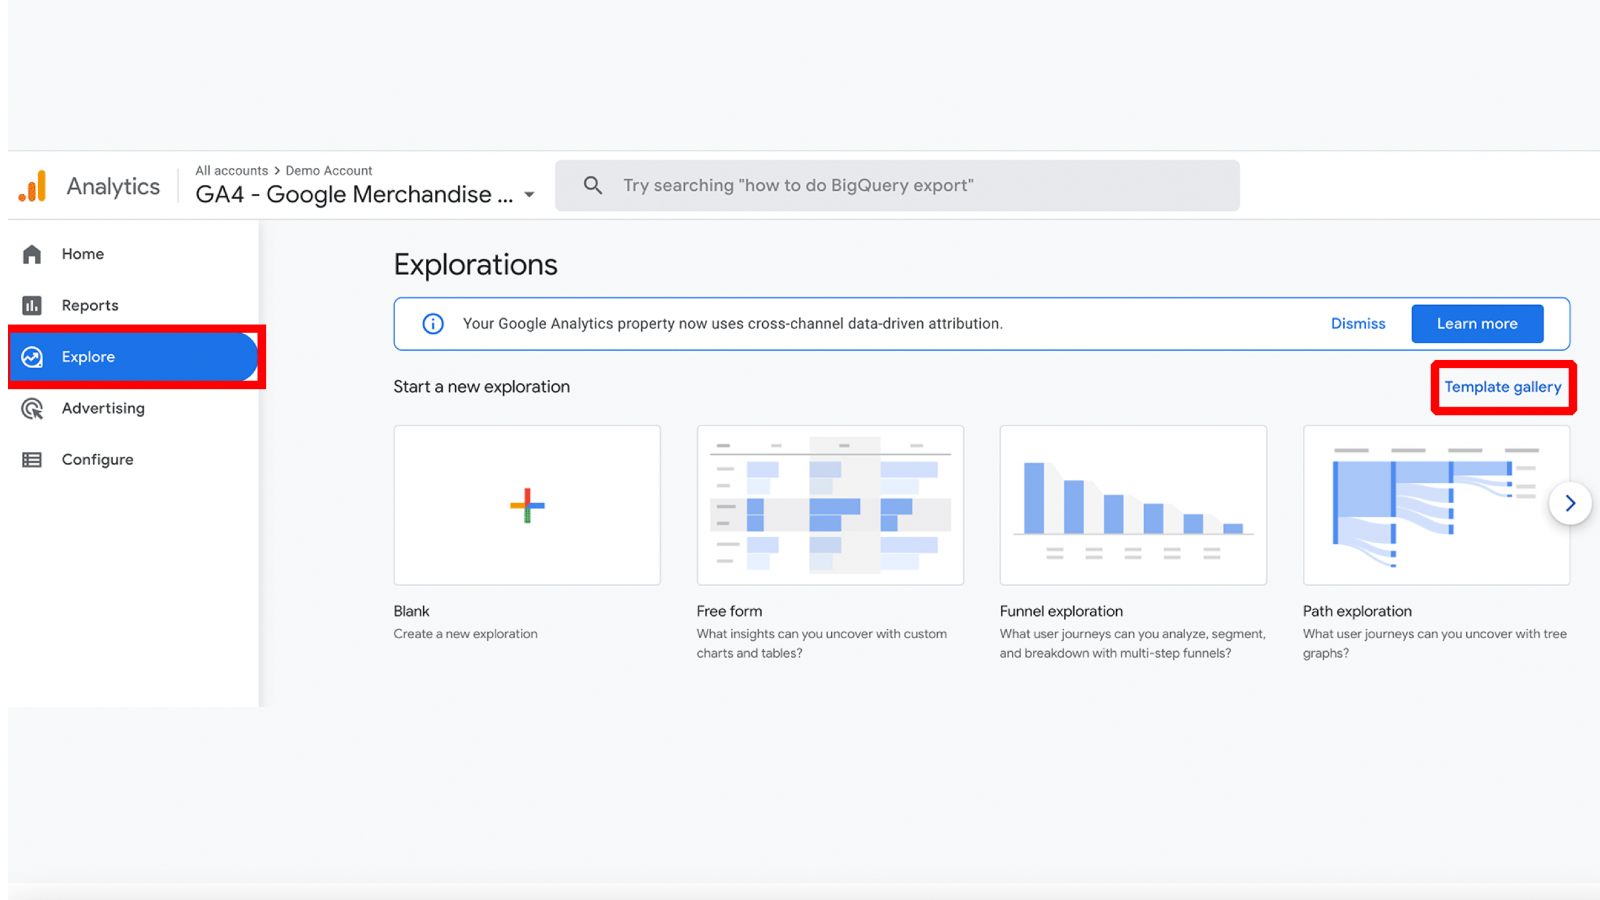 Google introduces a Predict Top Spenders Template in Google Analytics